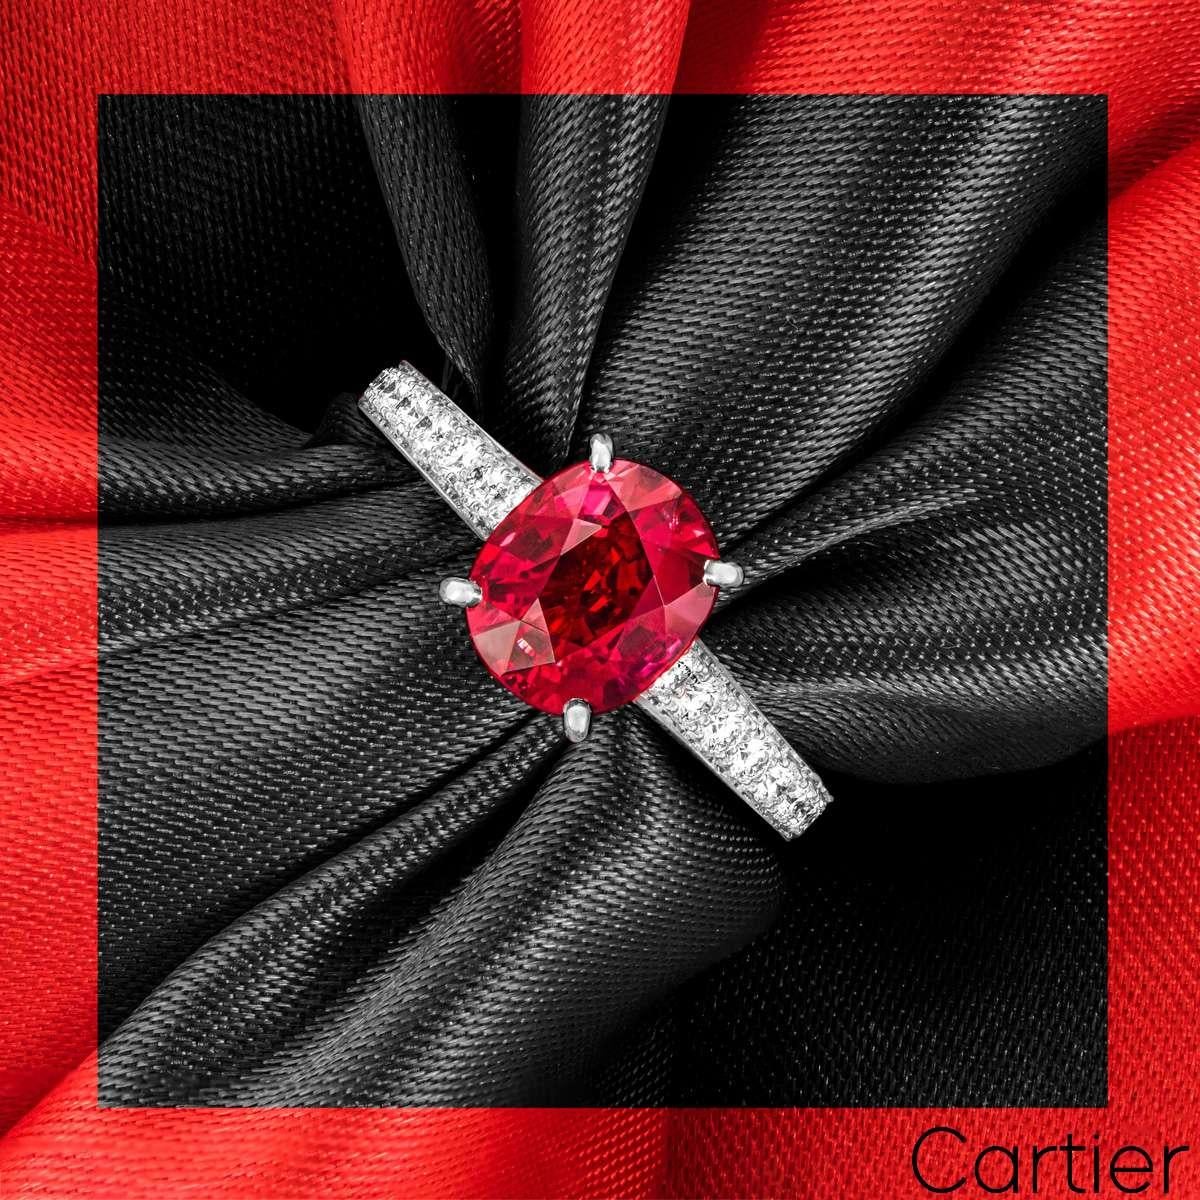 A captivating platinum ruby and diamond ring by Cartier. Set to the centre is a beautiful 2.36ct oval cut ruby from Mozambique displaying a vivid red hue often known as 'pigeon's blood' red. Accentuating the ruby are 24 round brilliant cut diamonds